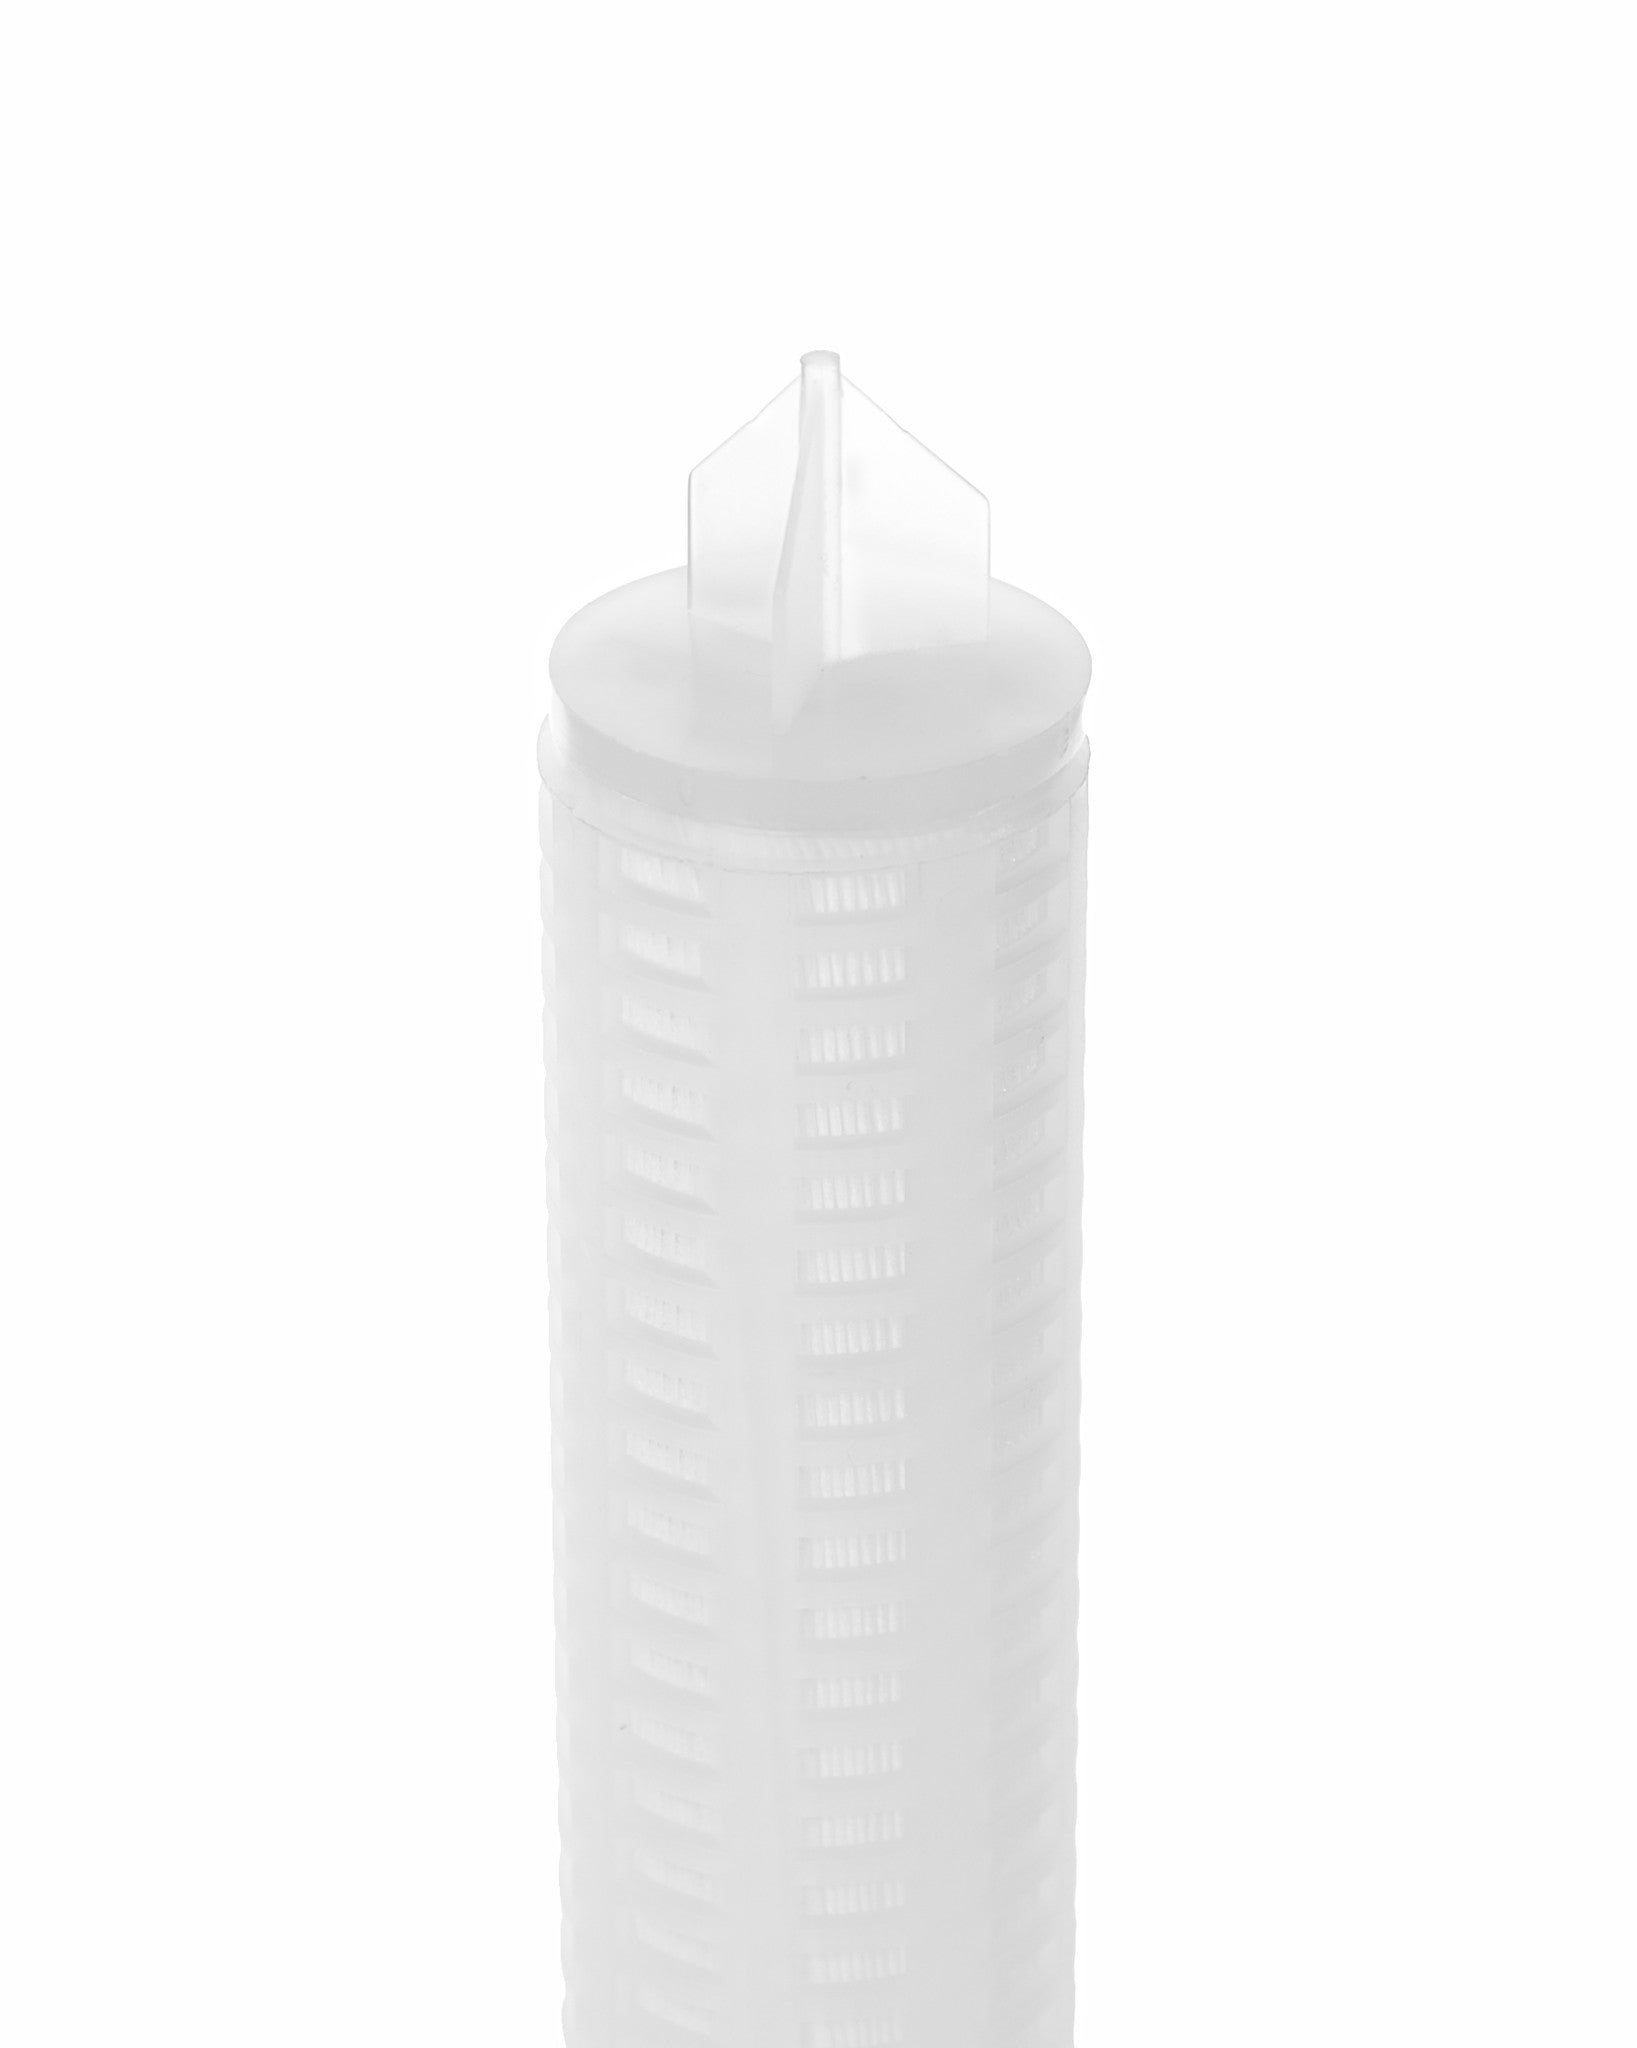 Filtersource.com Pleated Microglass Filter Cartridge Pleated Filter Cartridge - Filtersource.com - 6